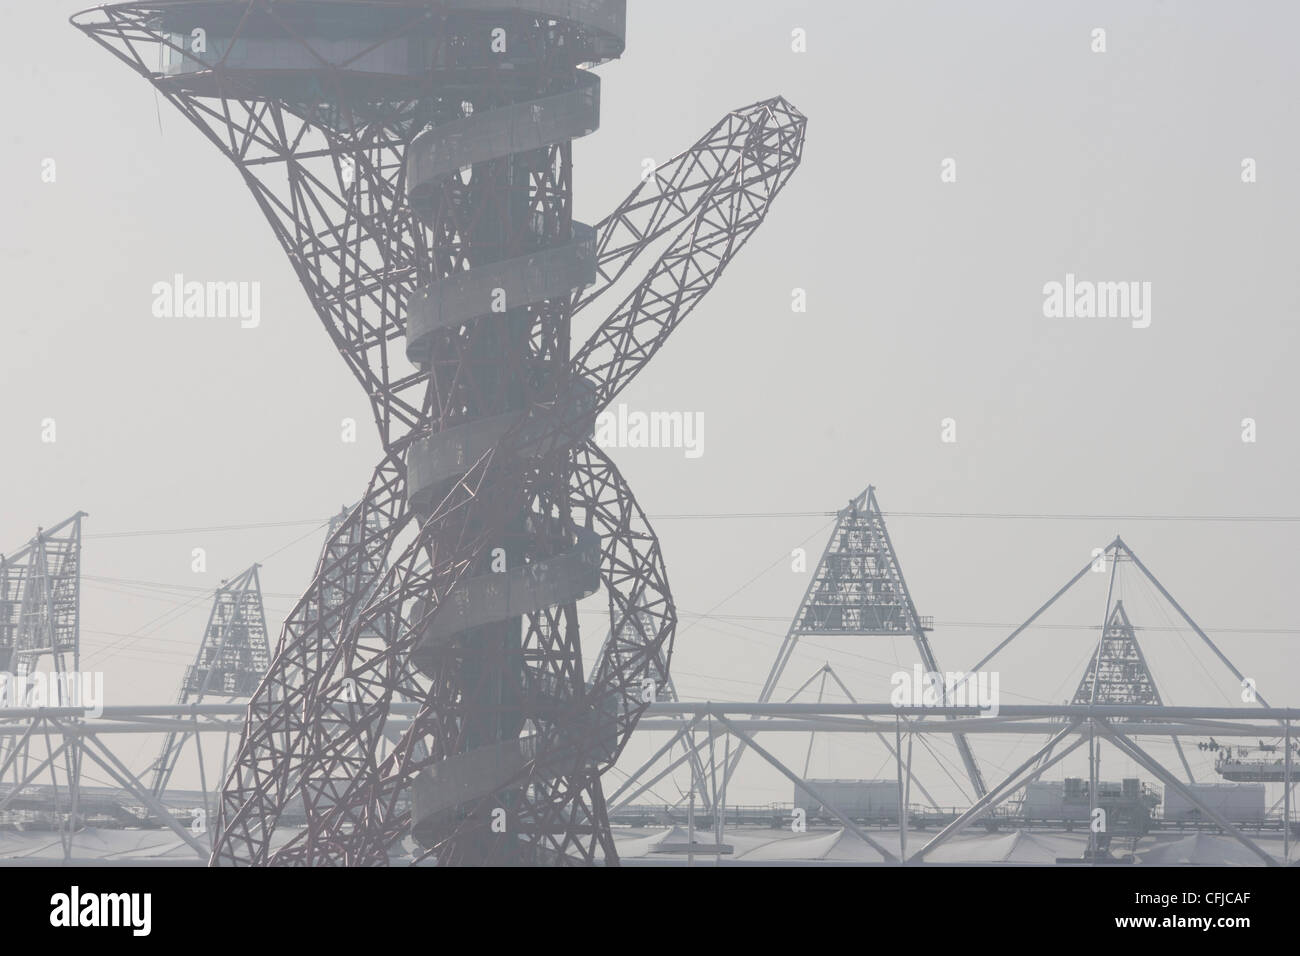 Structures of 2012 Olympic Park site showing The Orbit art tower and the main stadium at Stratford. The London Olympic Stadium will be the centrepiece of the 2012 Summer Olympics and Paralympics. Stock Photo